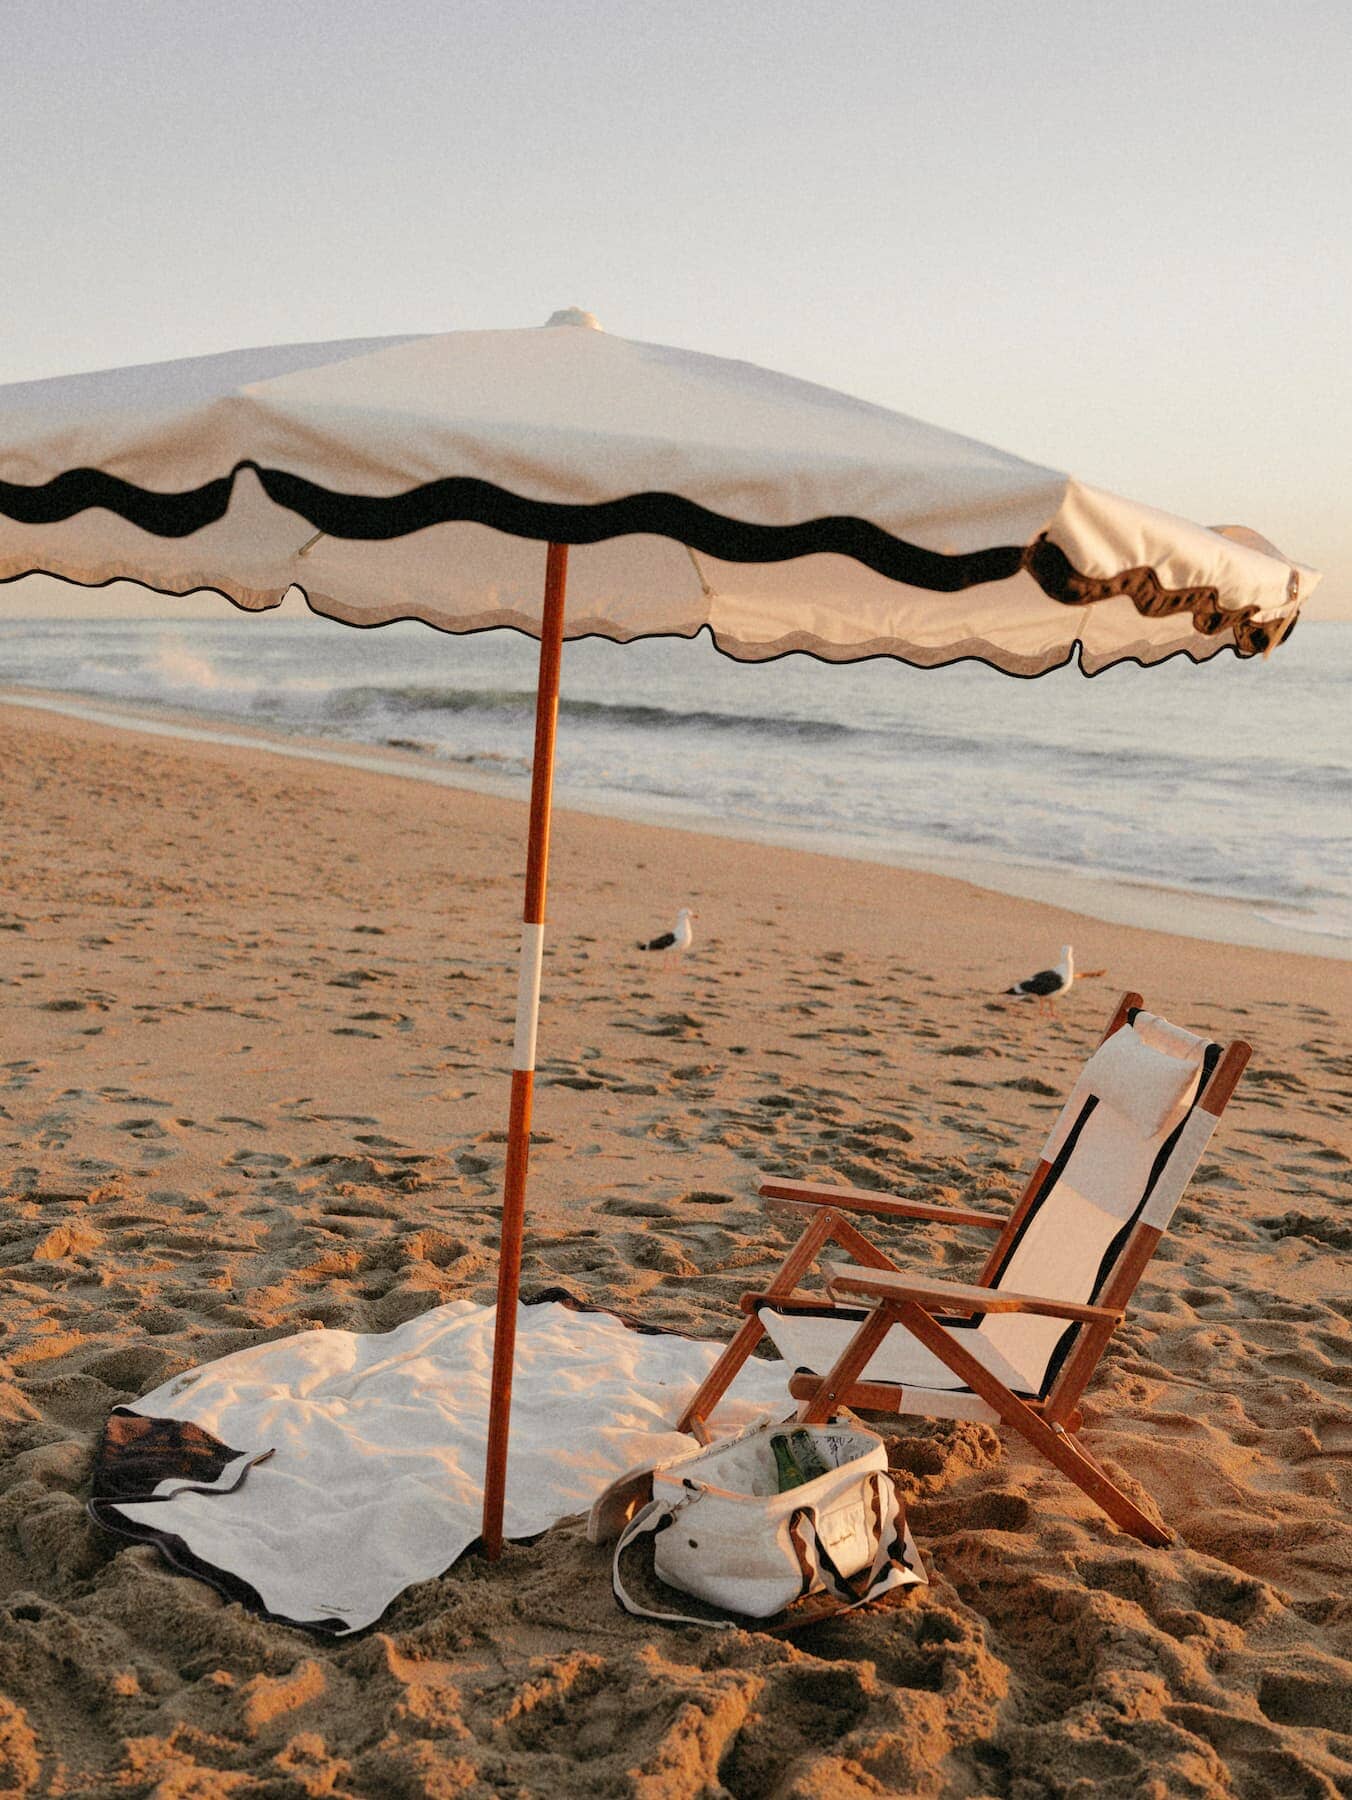 Riviera white beach set up with umbrella, chair, towel and cooler